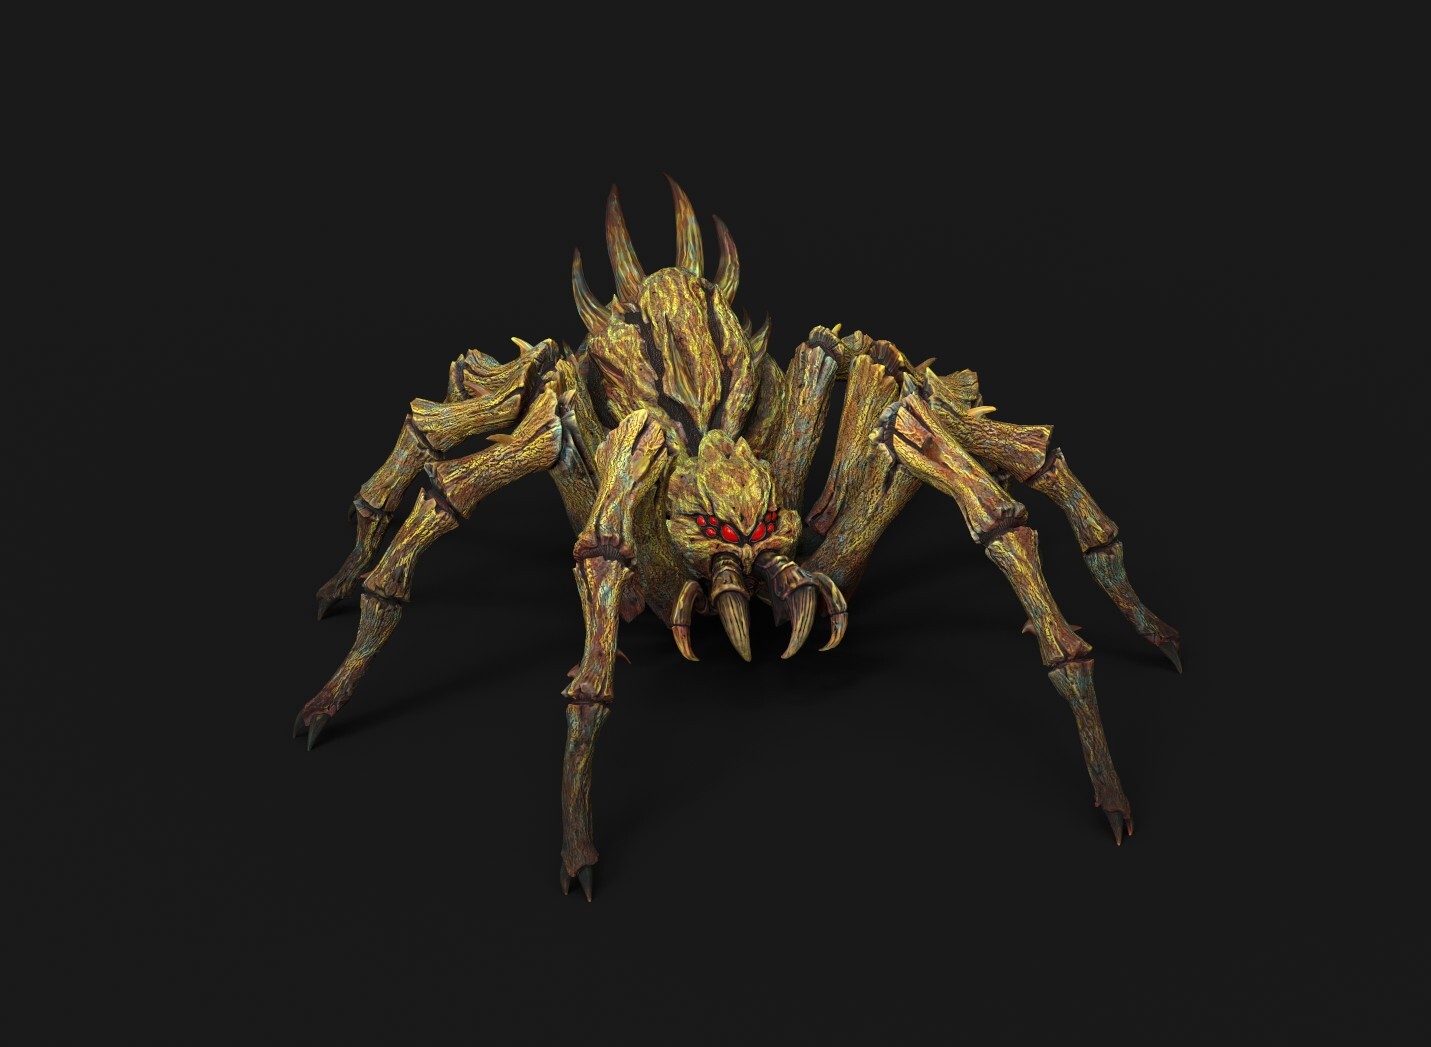 This Spider was sculpted/ modeled by Isaac Kellis.